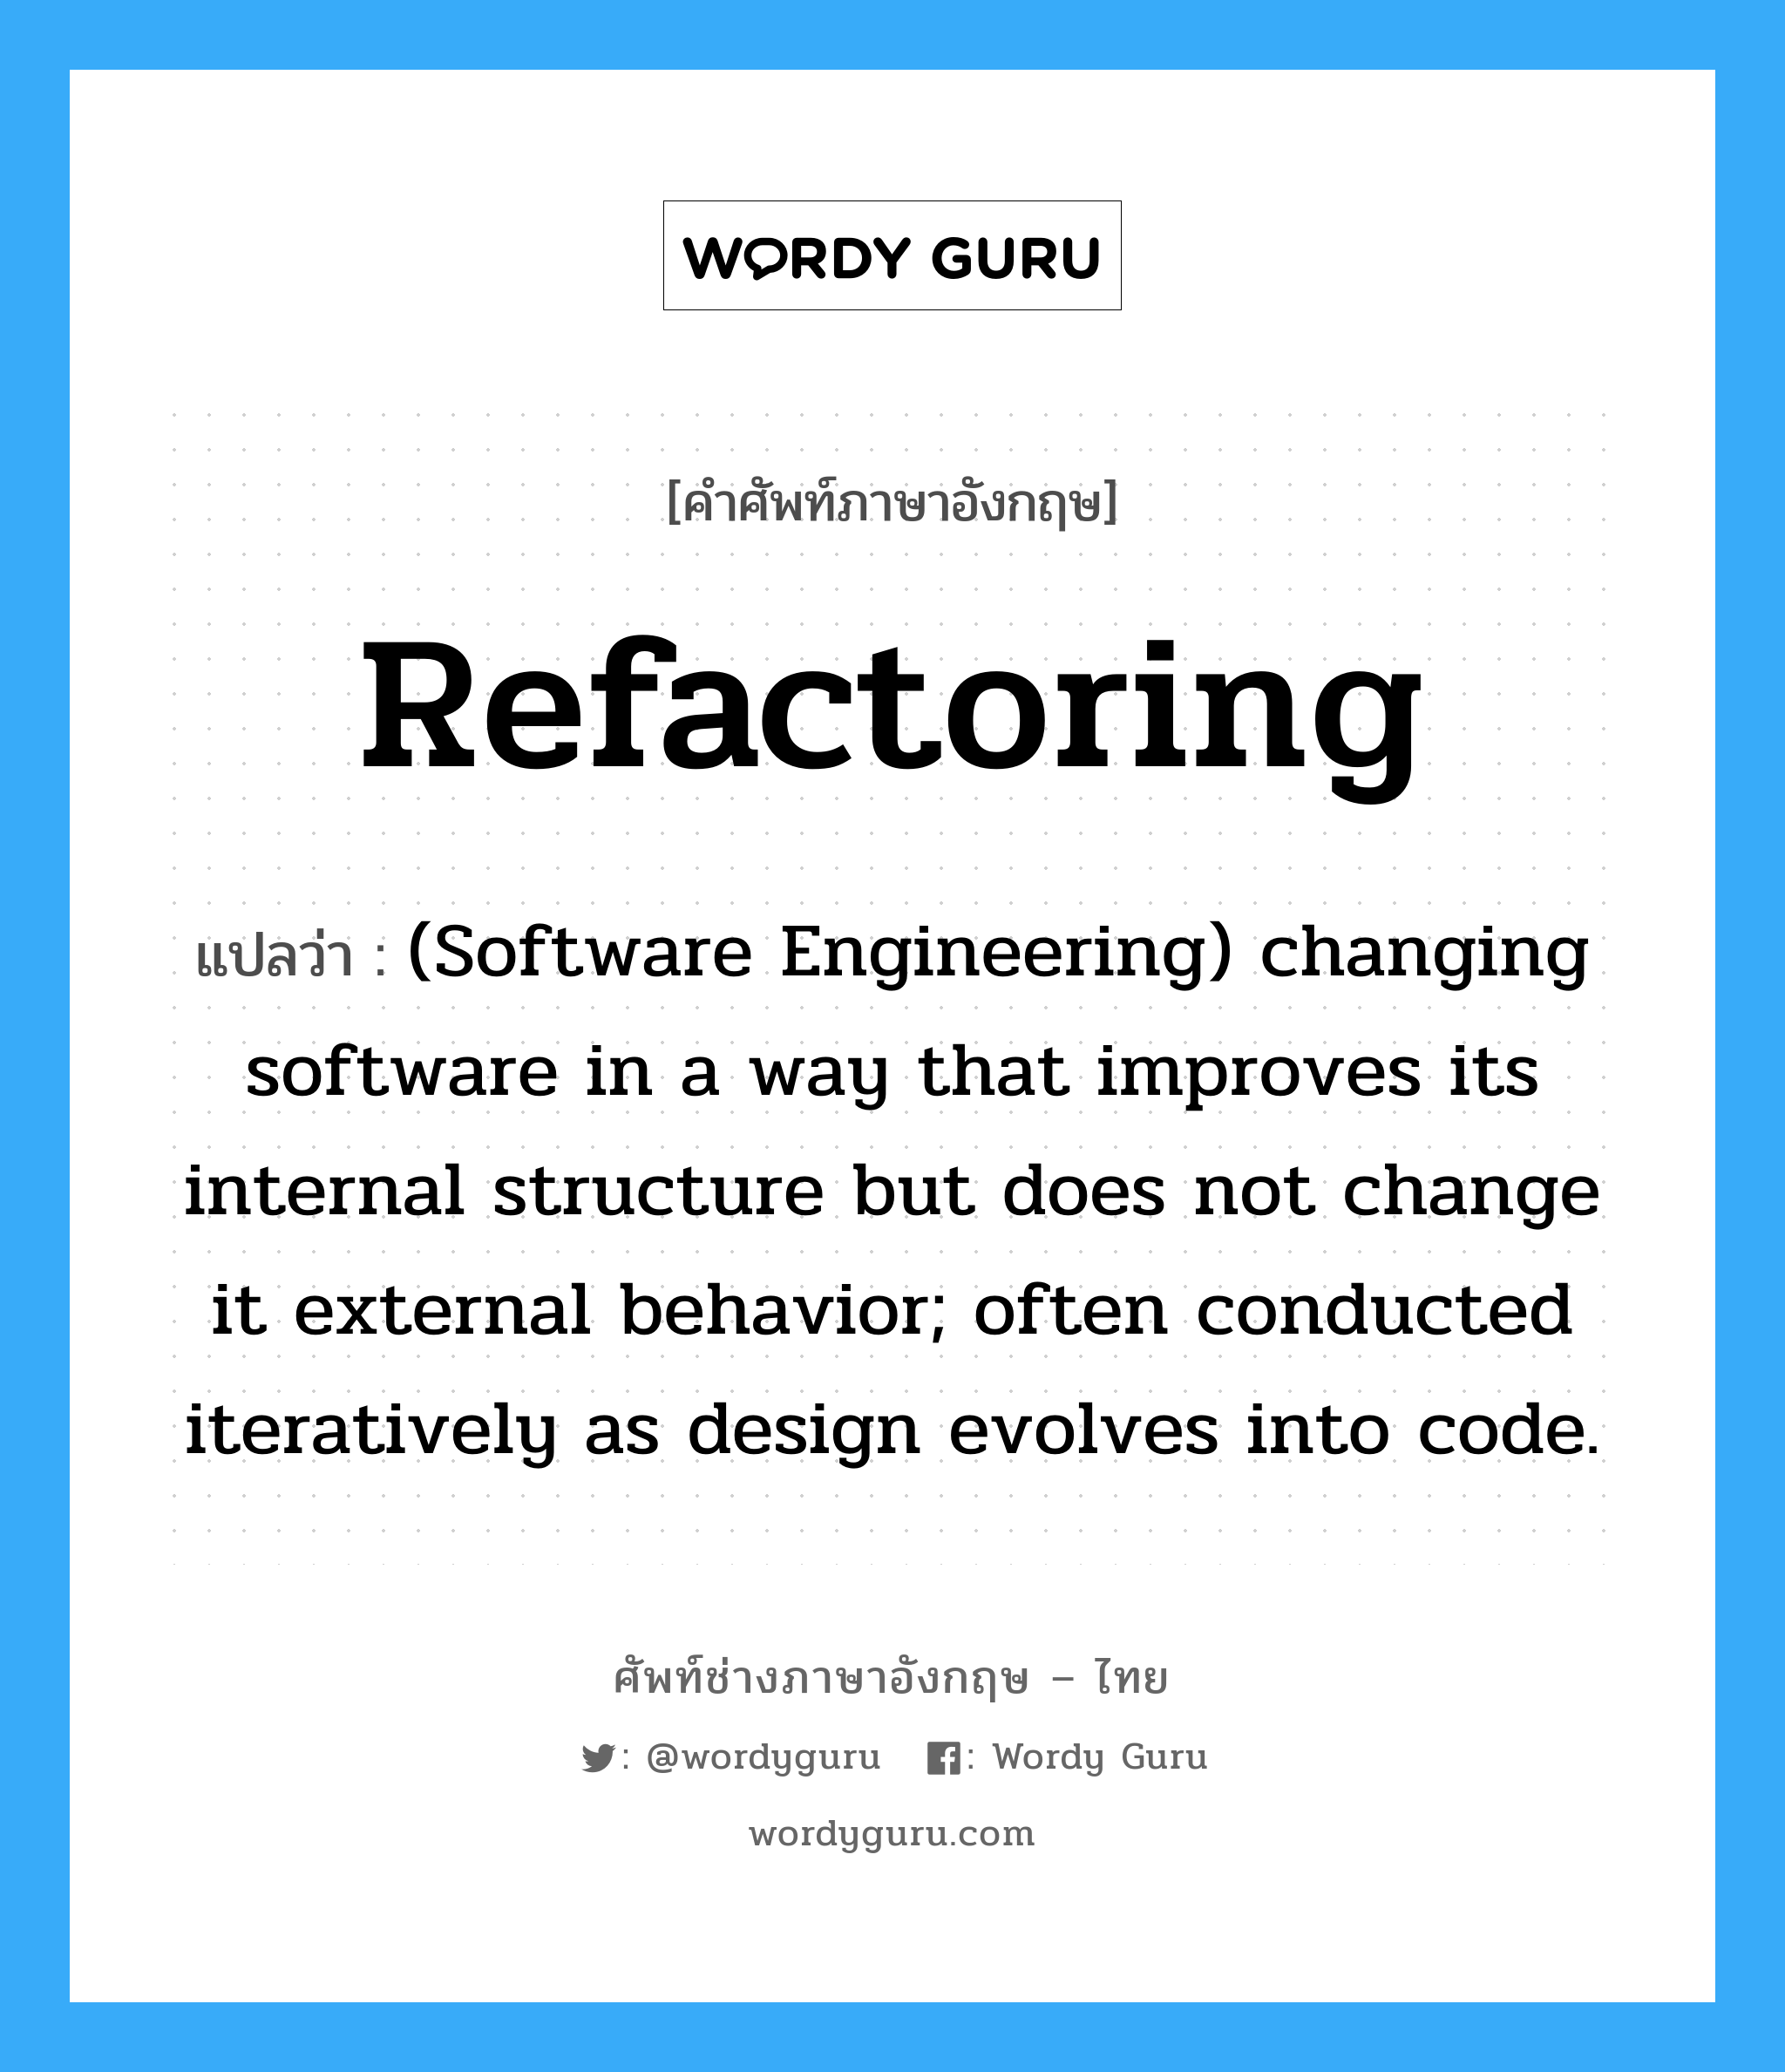 Refactoring แปลว่า?, คำศัพท์ช่างภาษาอังกฤษ - ไทย Refactoring คำศัพท์ภาษาอังกฤษ Refactoring แปลว่า (Software Engineering) changing software in a way that improves its internal structure but does not change it external behavior; often conducted iteratively as design evolves into code.